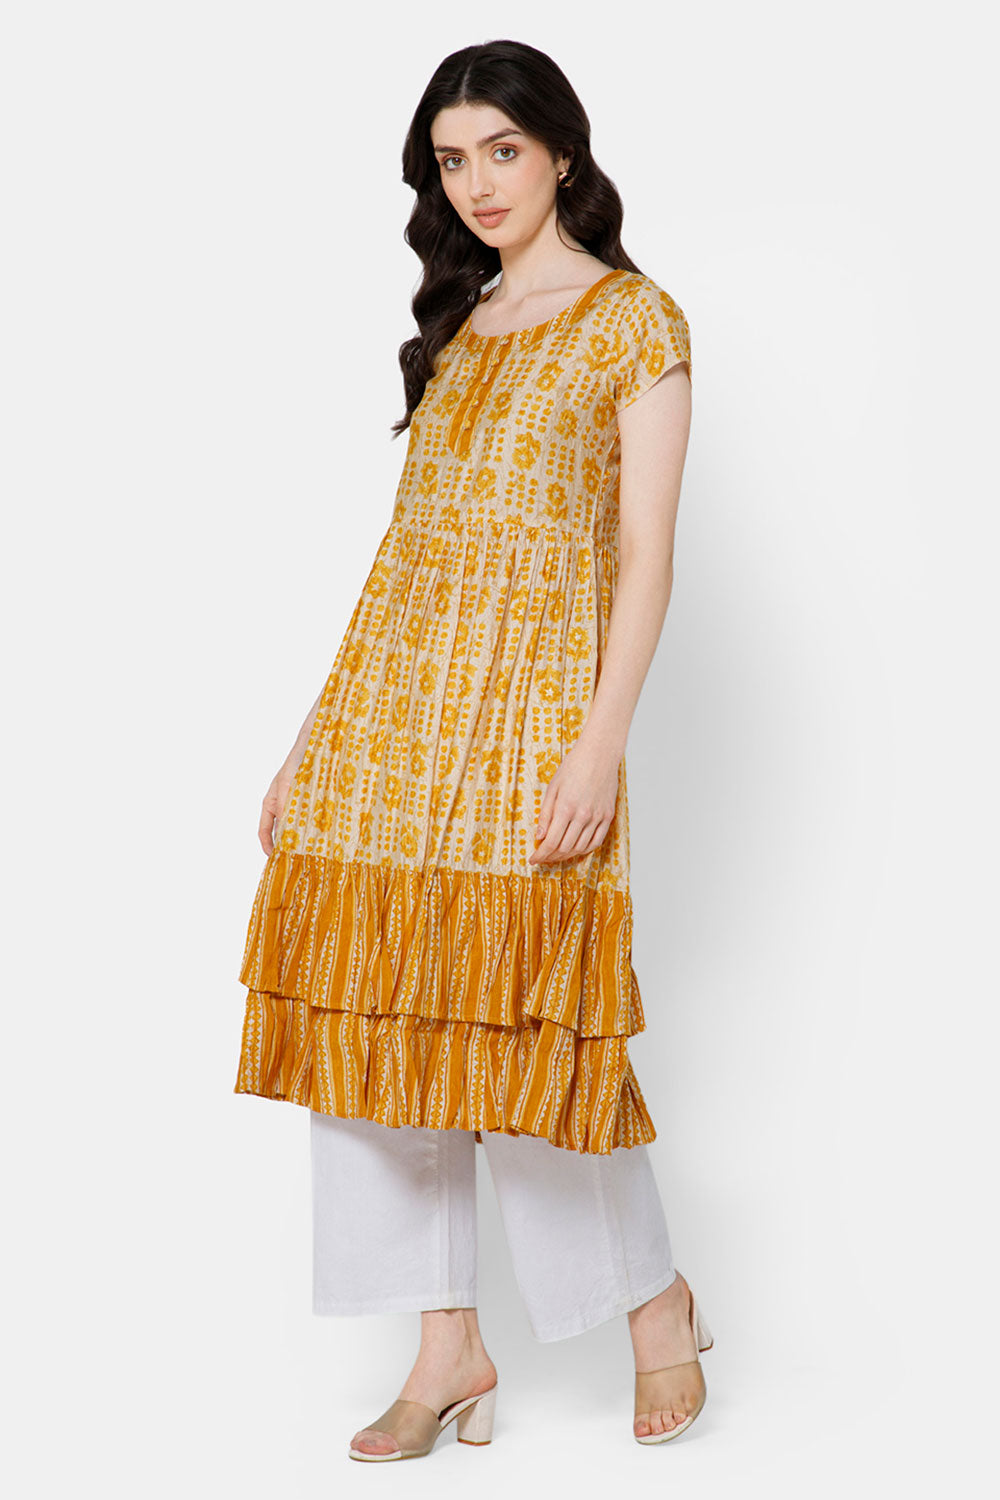 Mythri Women's Fit and Flare Casual Dress - Mustard - DR04